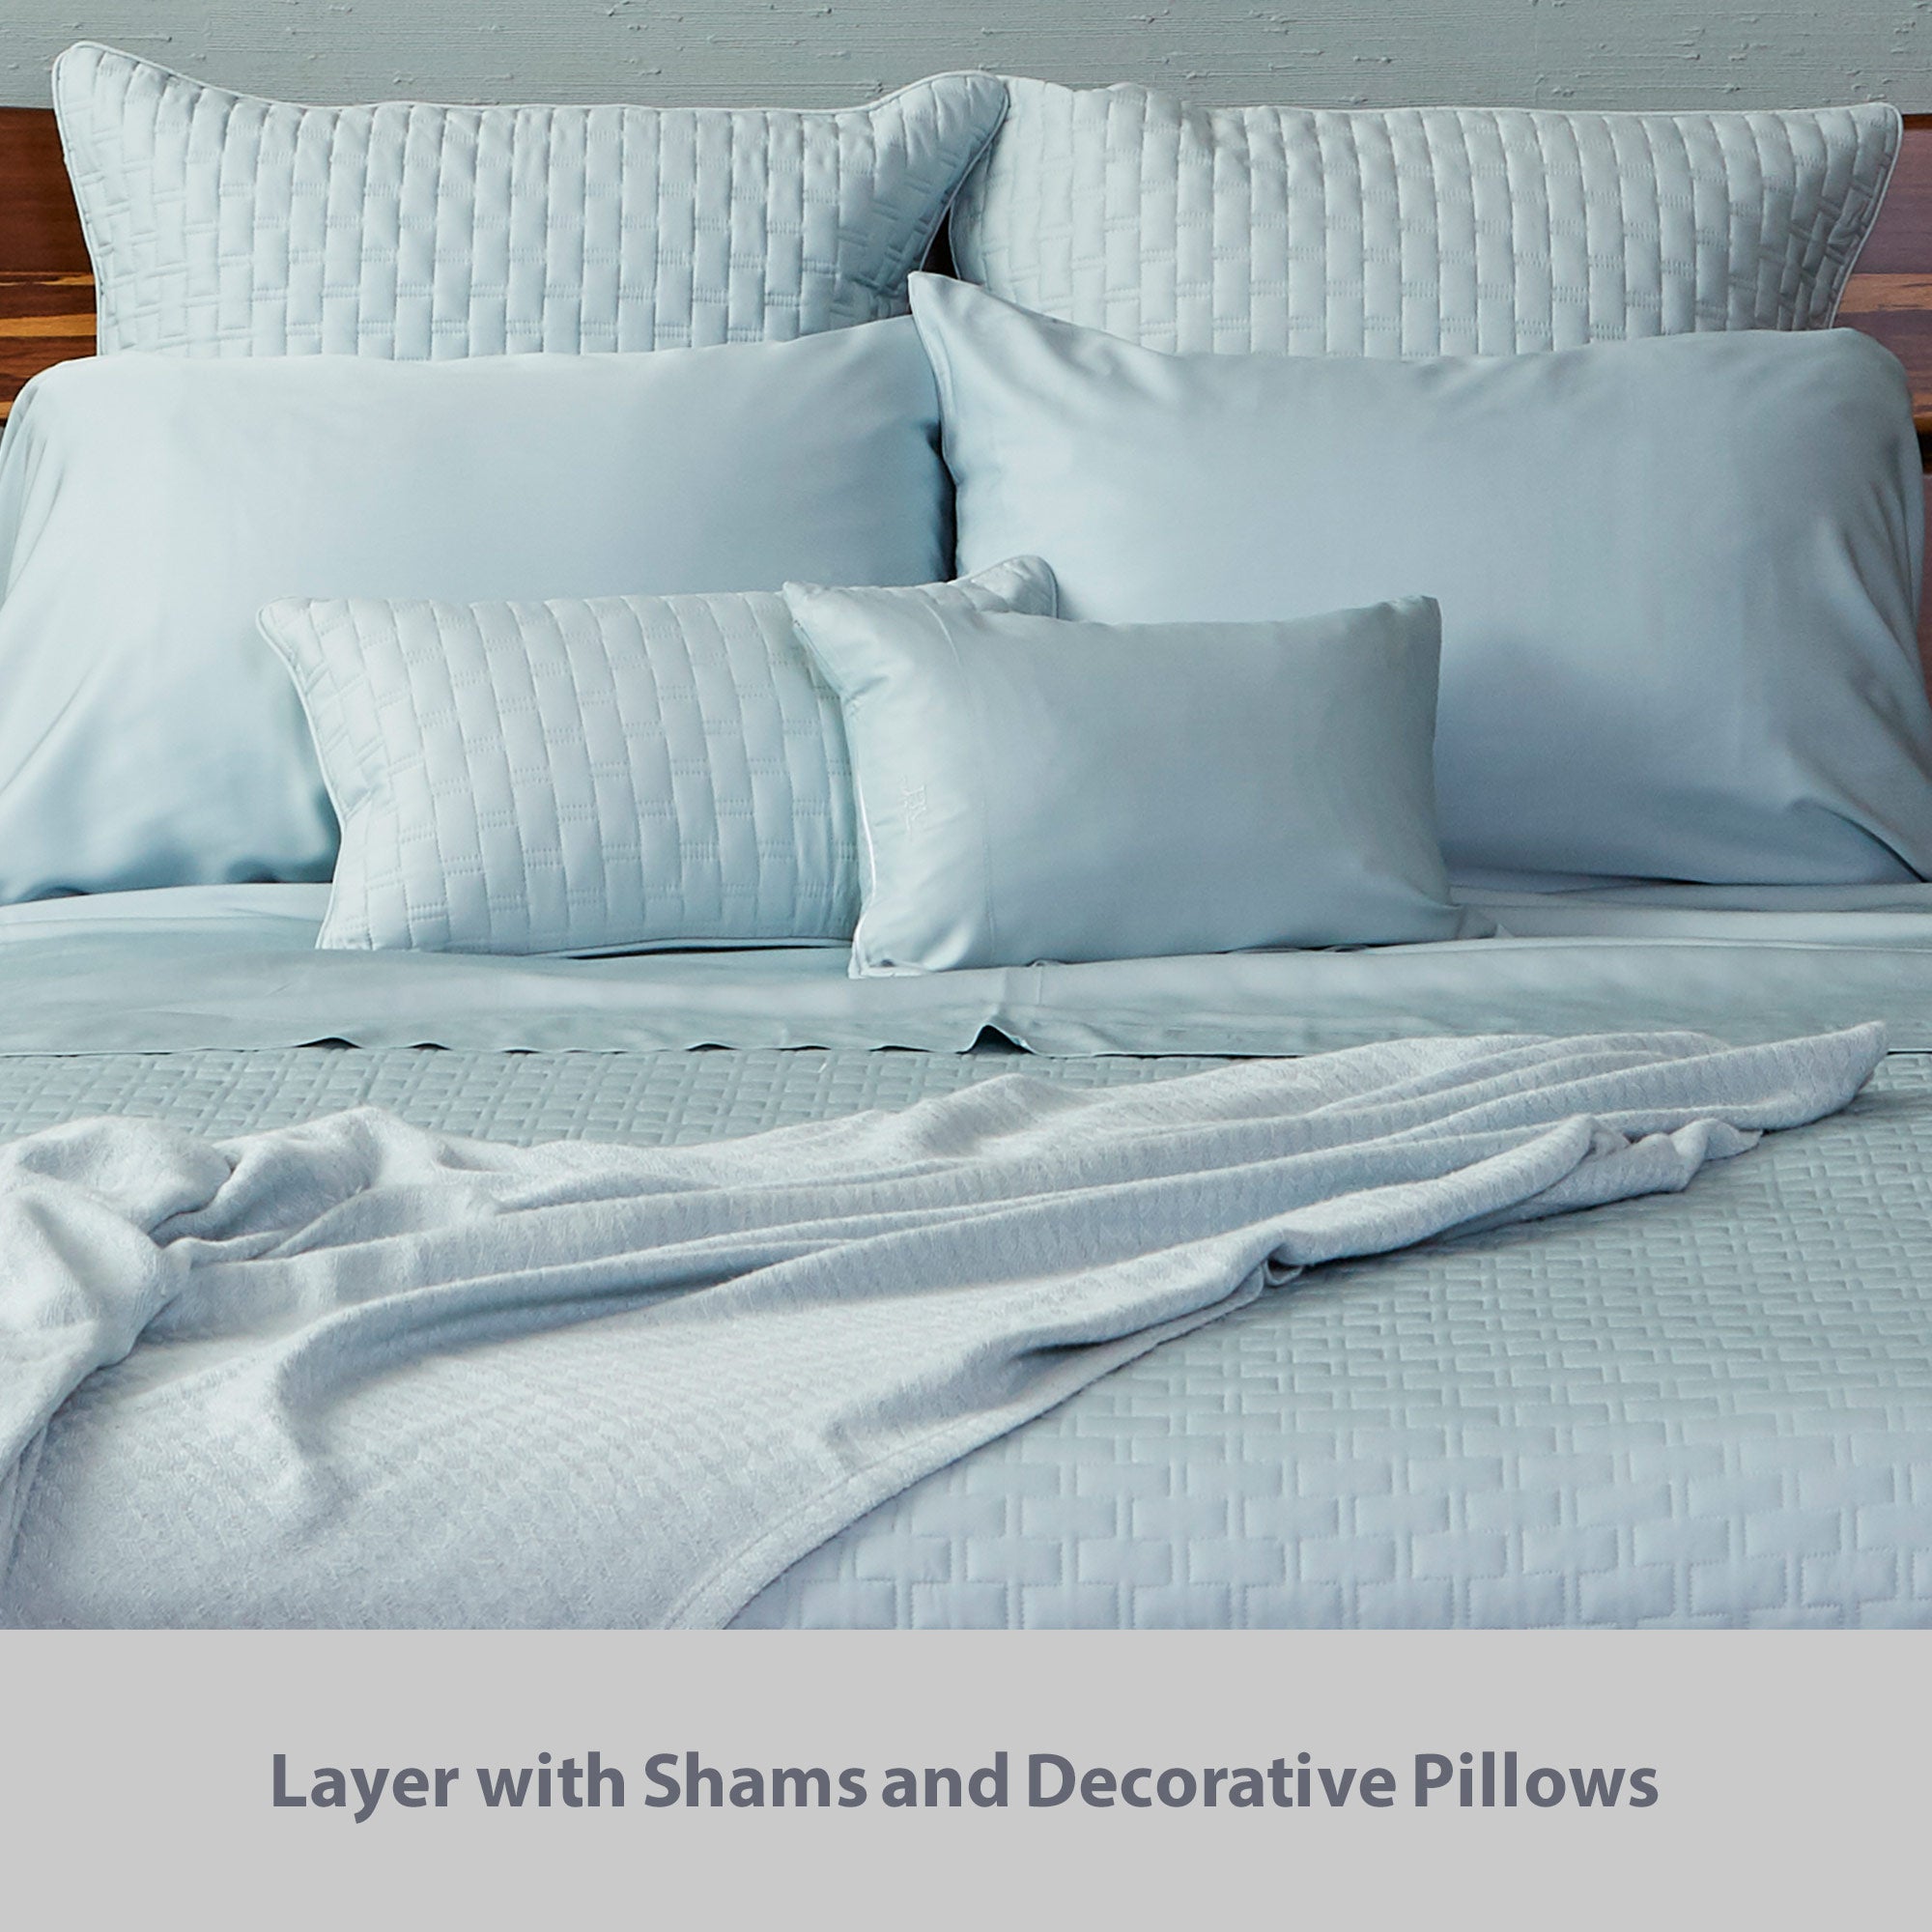 BAMBOO Pillow Case Set - Luxurious, Hypoallergenic Bed Cover Sets - Made from 100% Bamboo - Sky